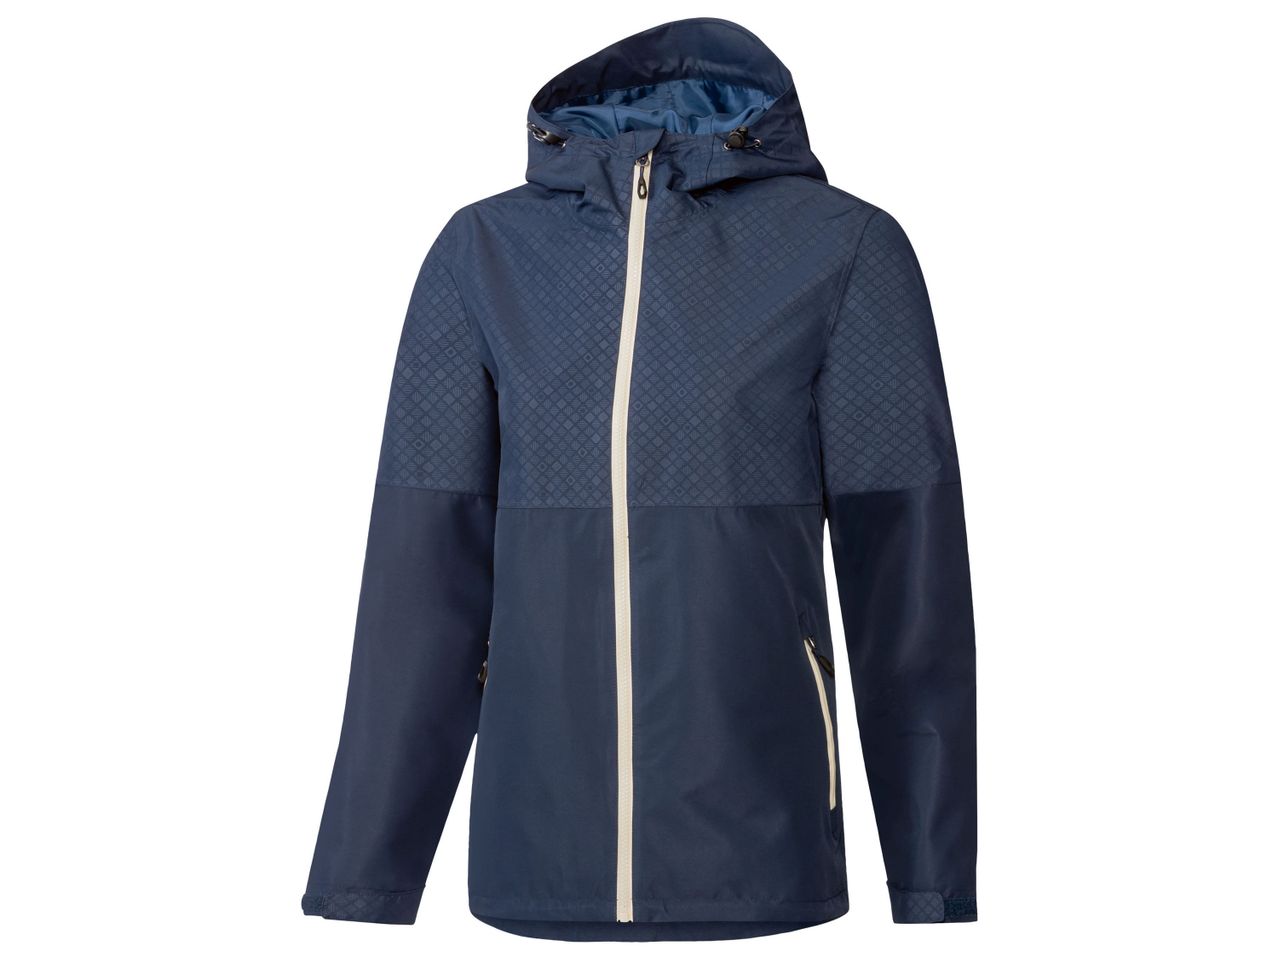 Go to full screen view: Ladies’ All Weather Jacket - Image 2